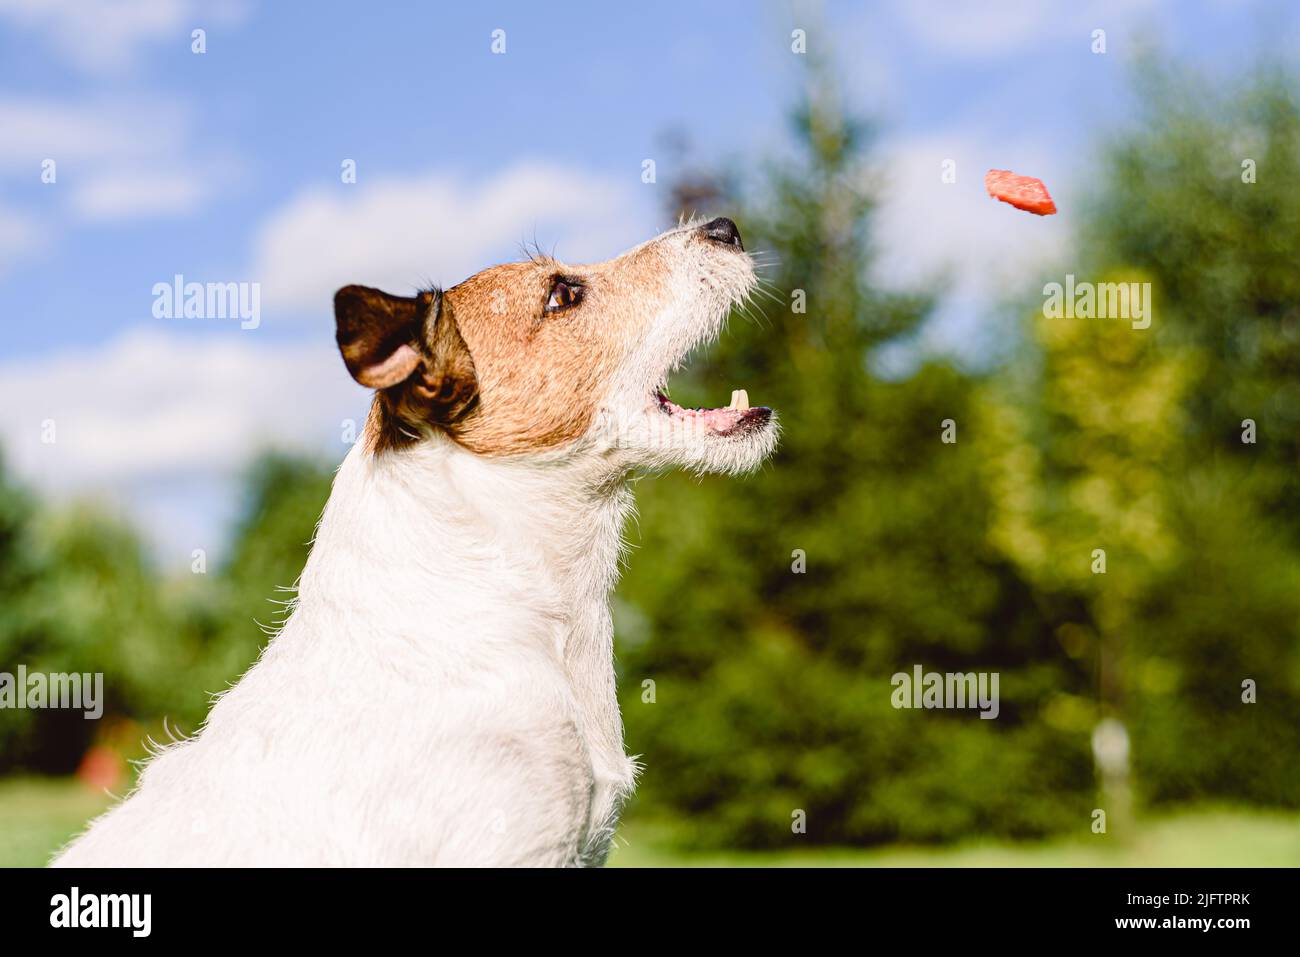 Dog sitting in profile catching in air juicy piece of fresh watermelon treat Stock Photo